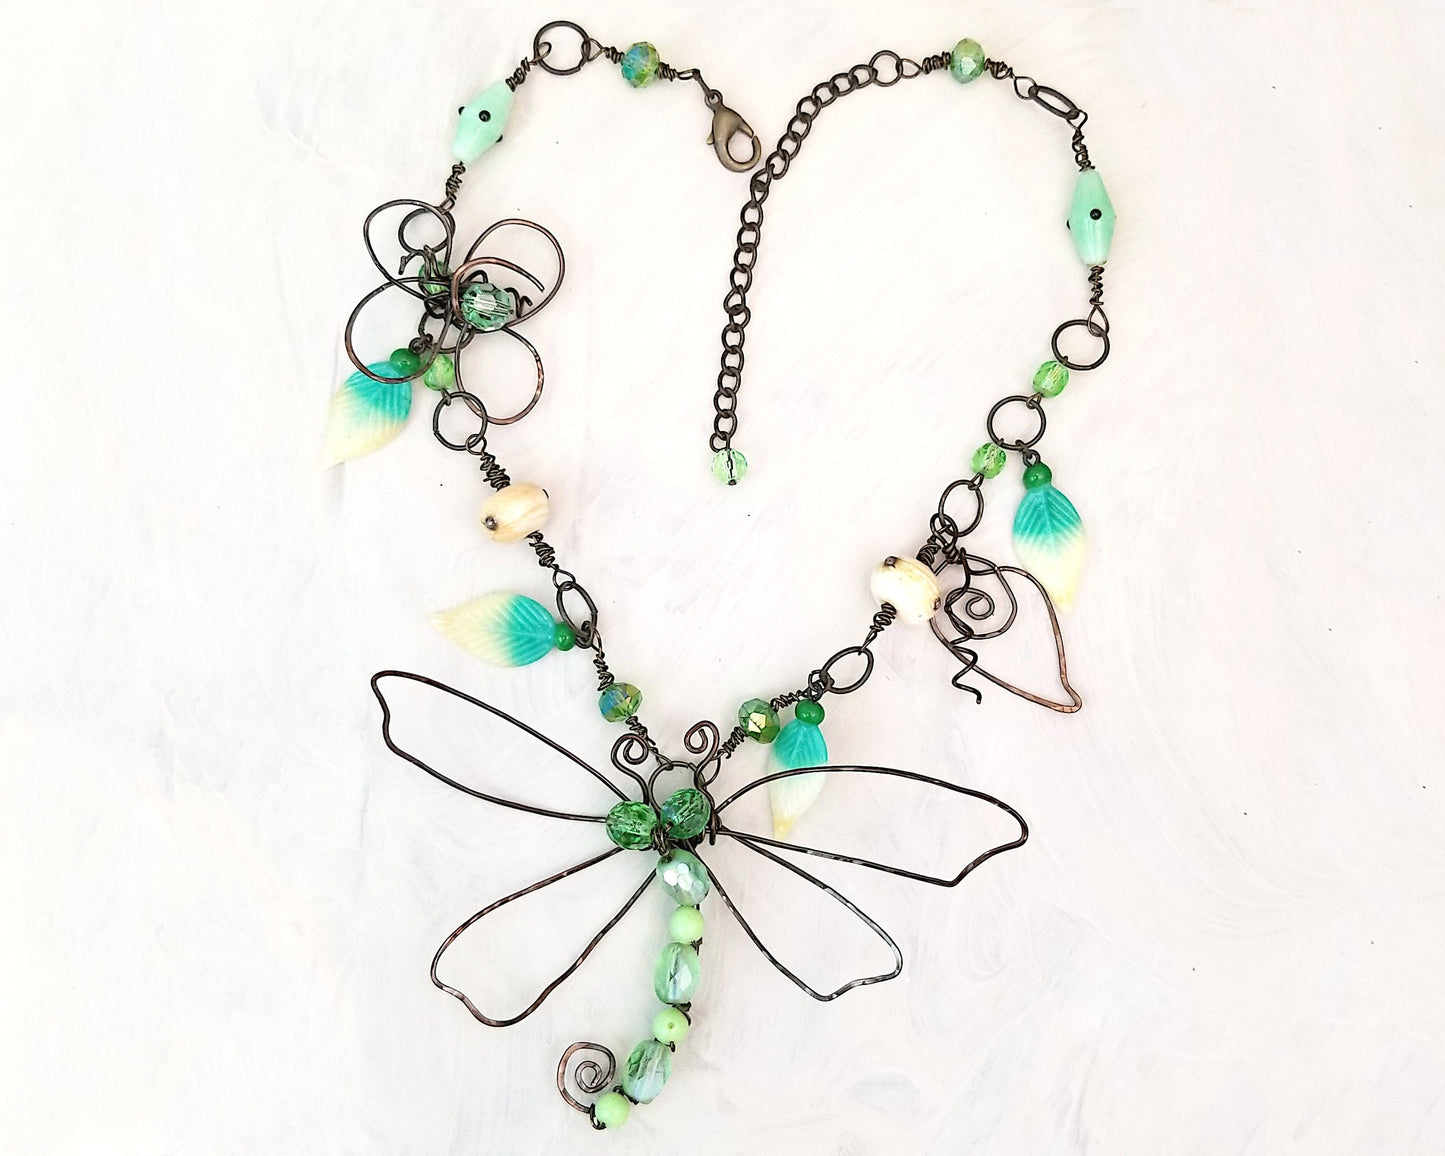 Fantasy Wire Dragonfly Necklace with Vintage Green Glass Beads, Garden, Party, Adjustable Length